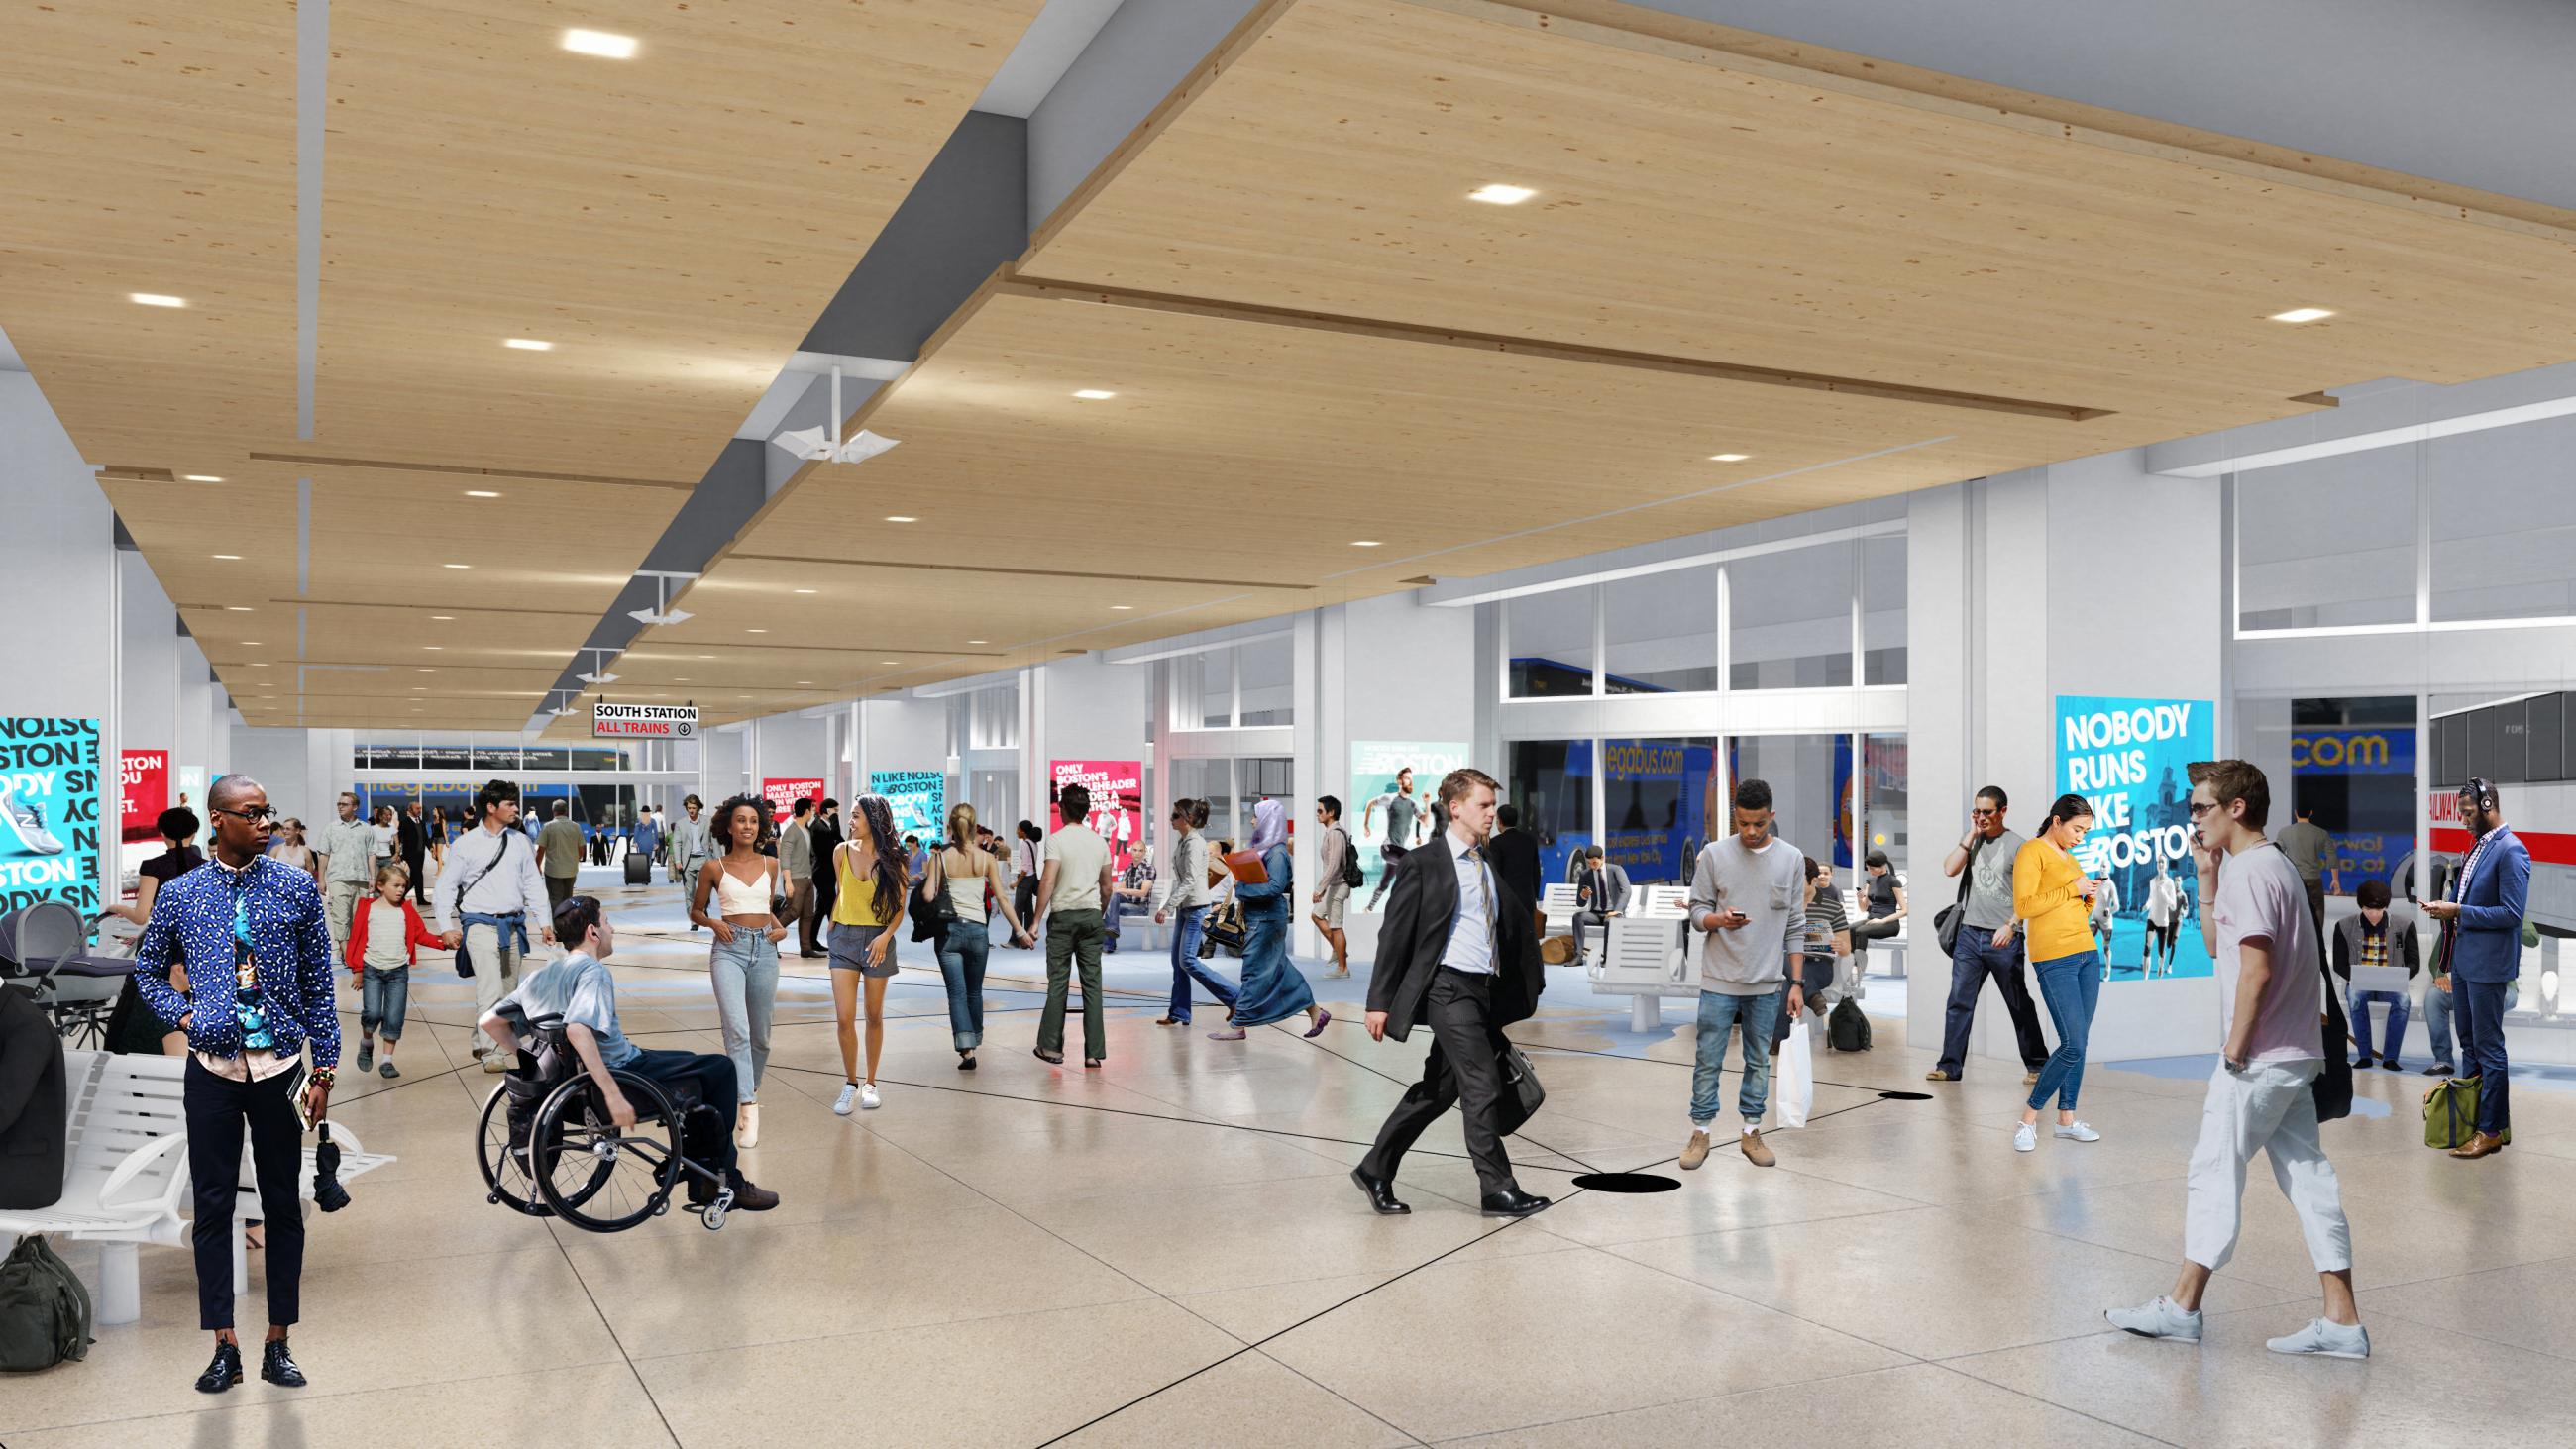 A rendering shows what the expanded bus terminal will look like at South Station